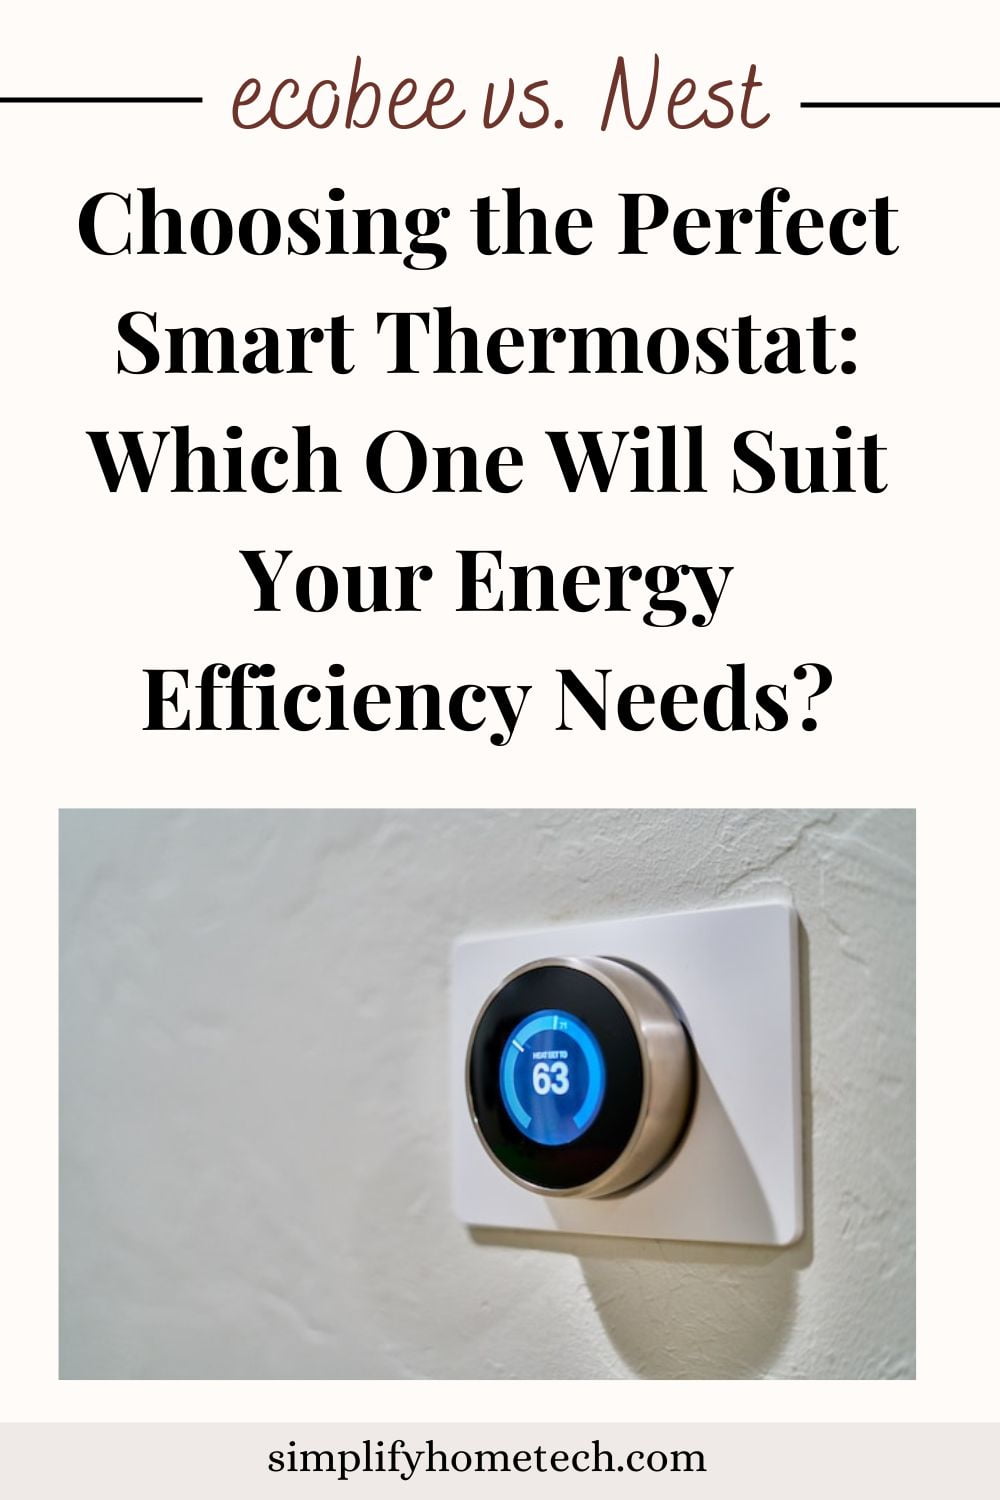 Choosing the Perfect Smart Thermostat: ecobee vs. Nest - Which One Will Suit Your Energy Efficiency Needs?